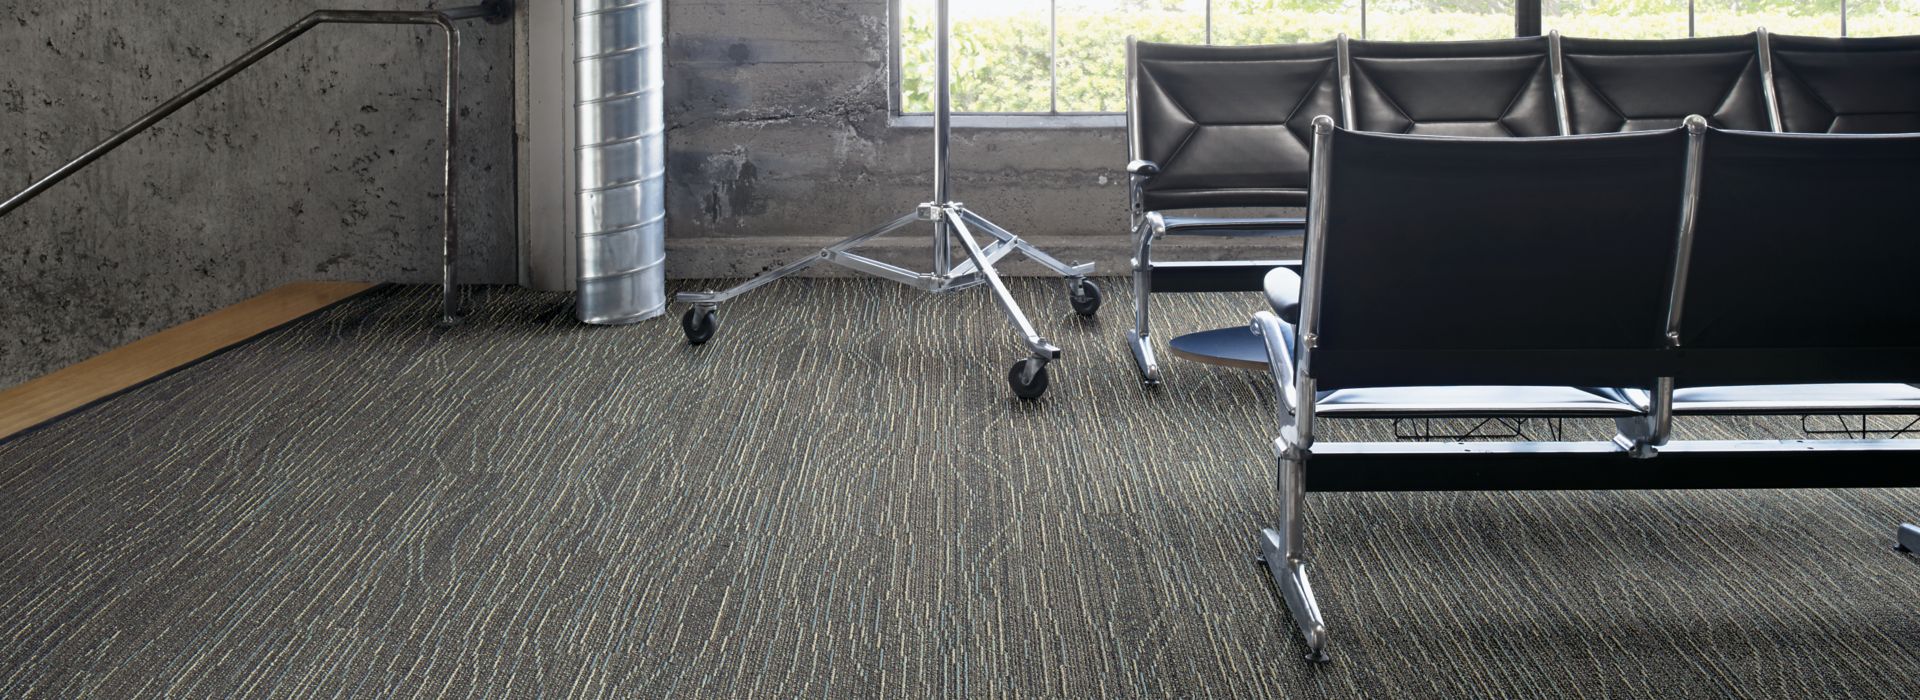 Interface Snow Moon plank carpet tile in waiting area with concrete walls and exposed beams